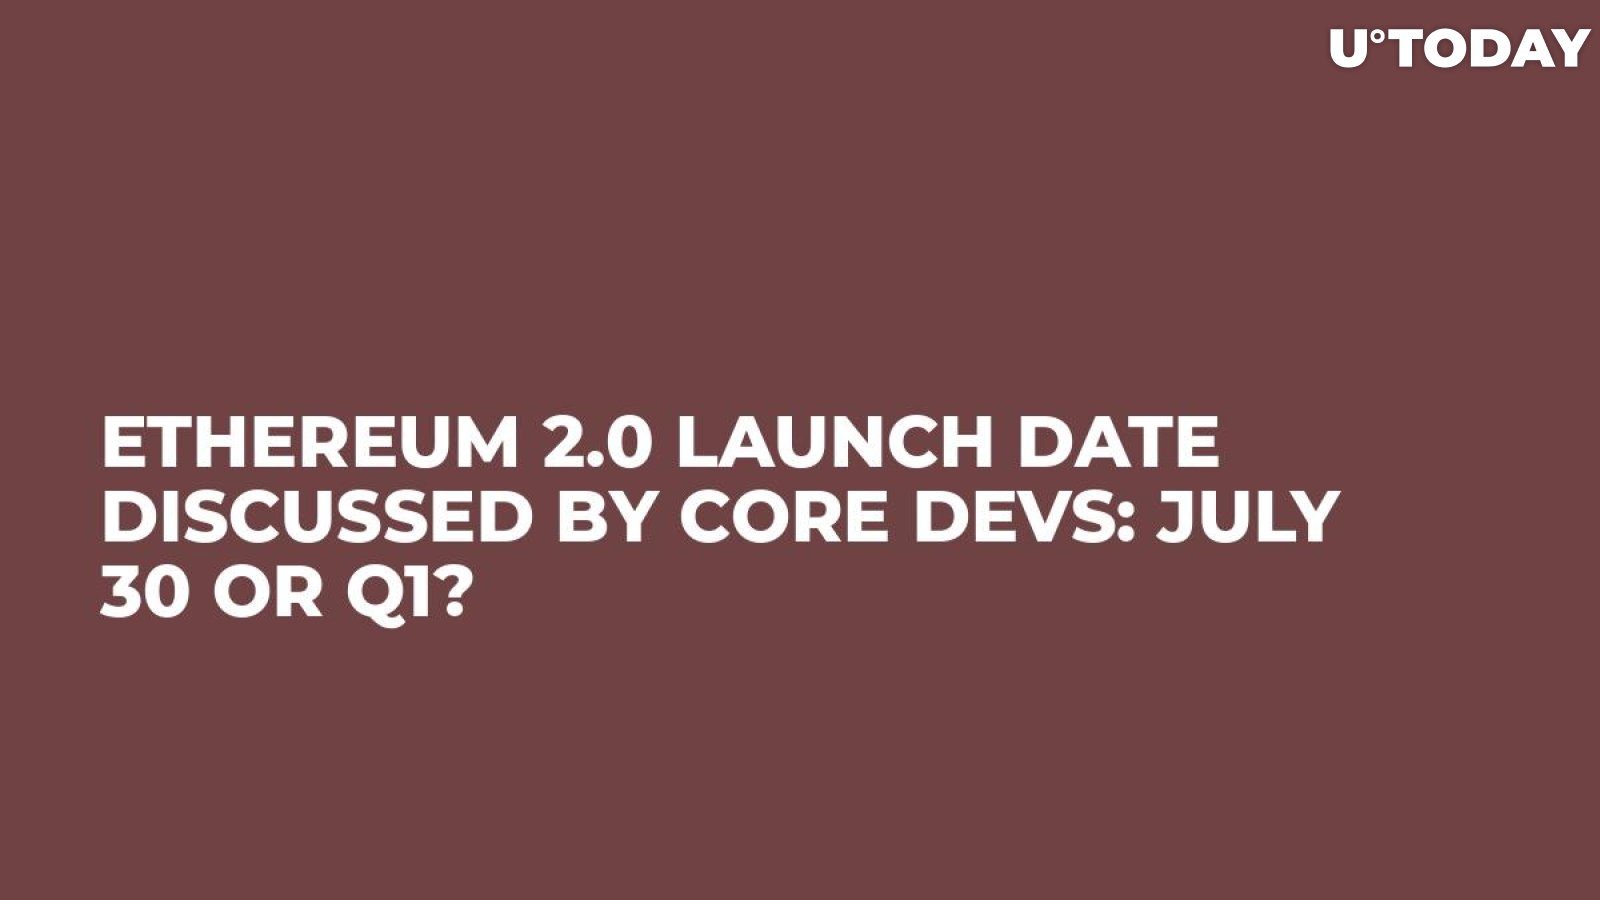 Ethereum 2.0 Launch Date Discussed by Core Devs: July 30 or Q1?